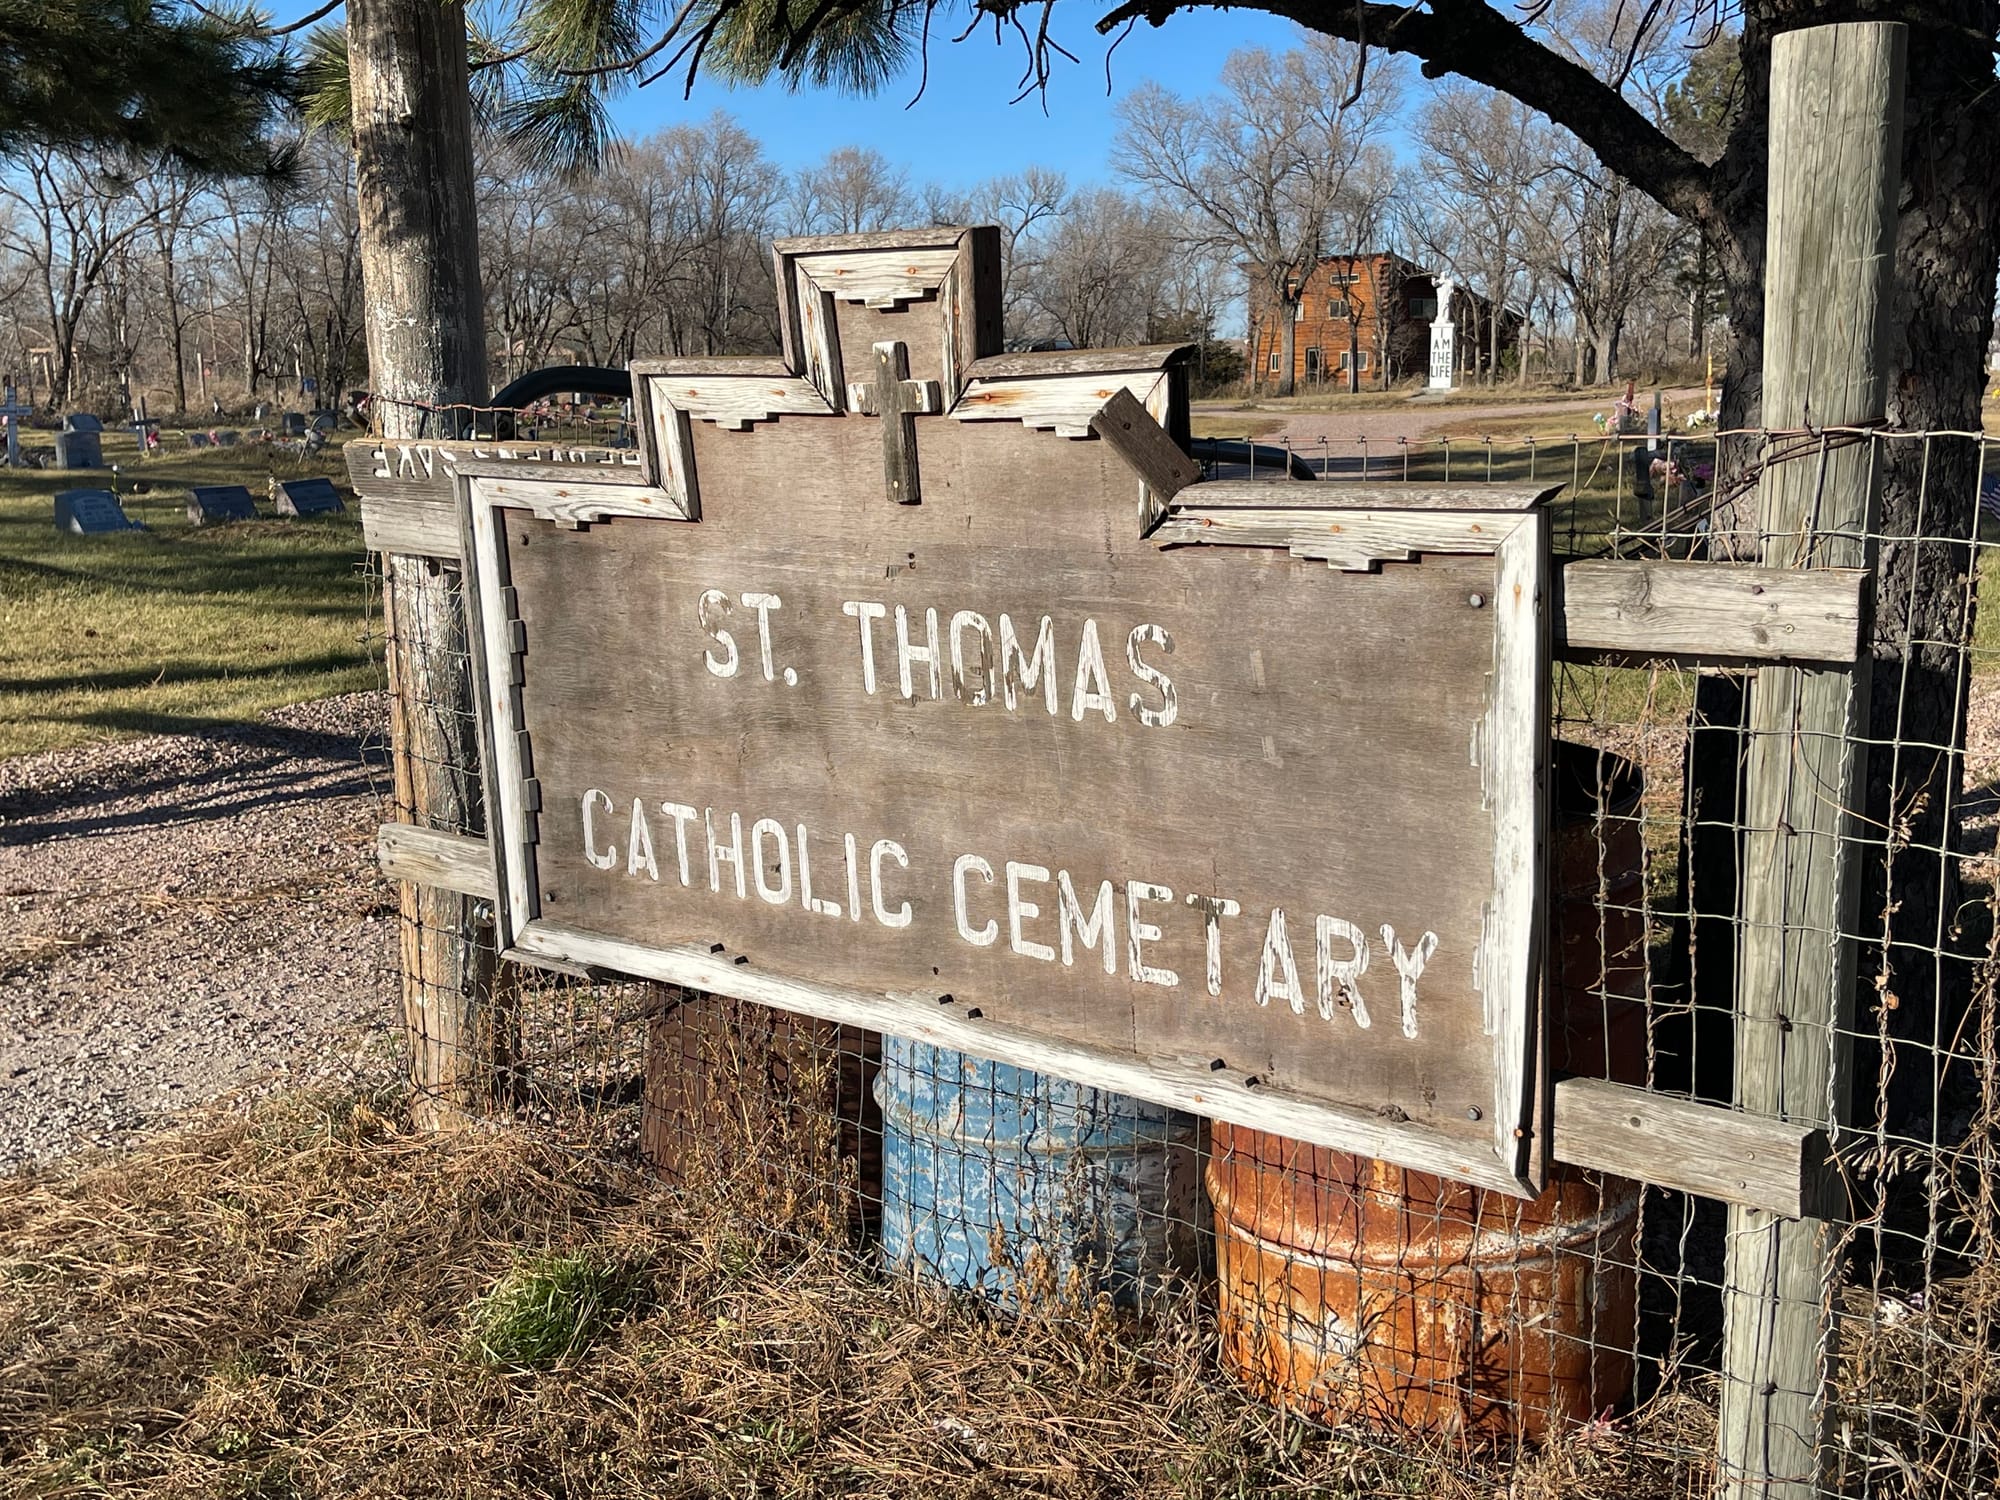 A sign at the St. Thomas Catholic Cemetery in Mission, South Dakota, where Honor Beauvais is buried.